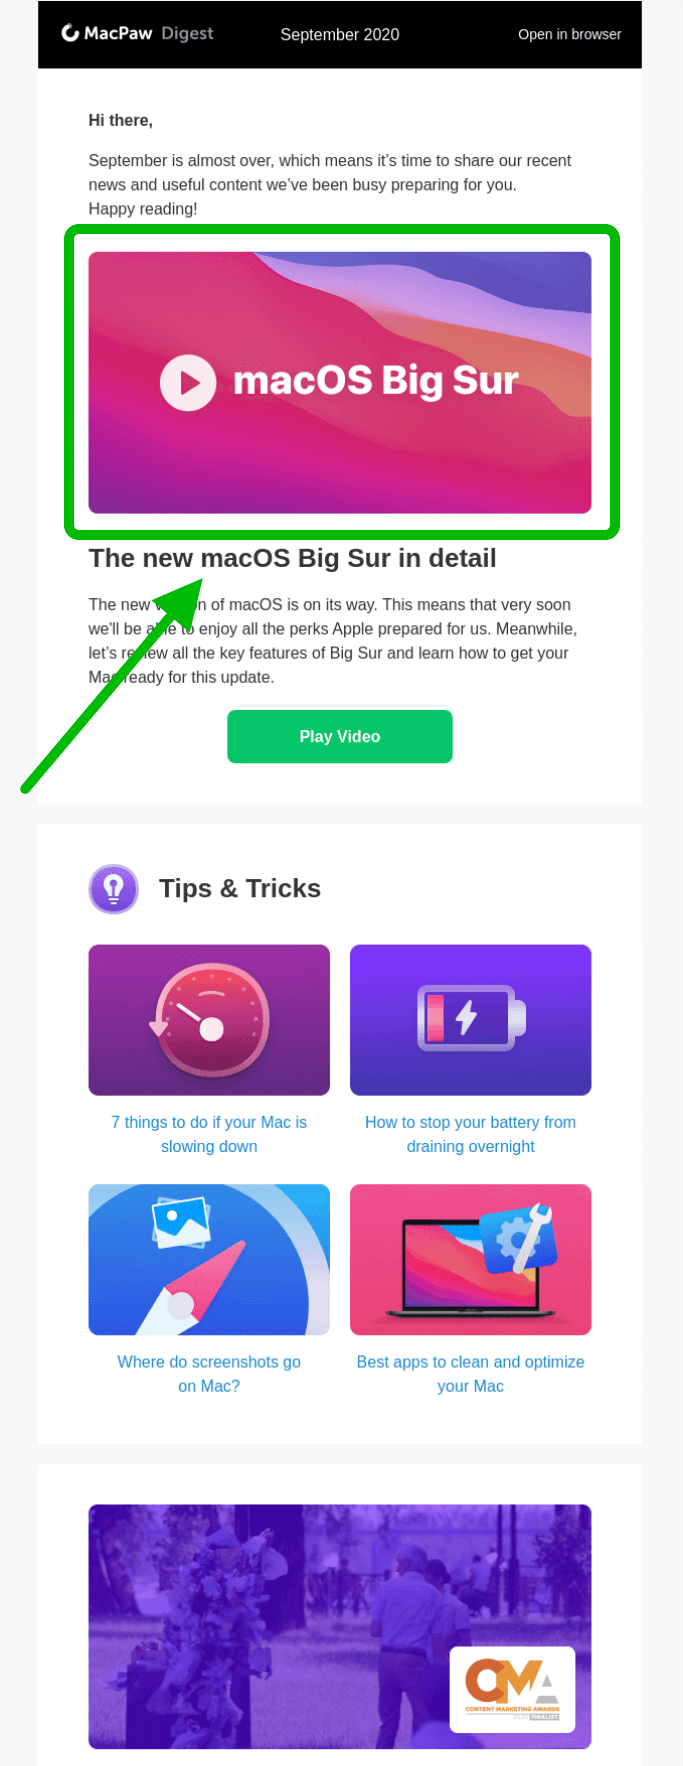 MacPaw’s image with a Play button in the email